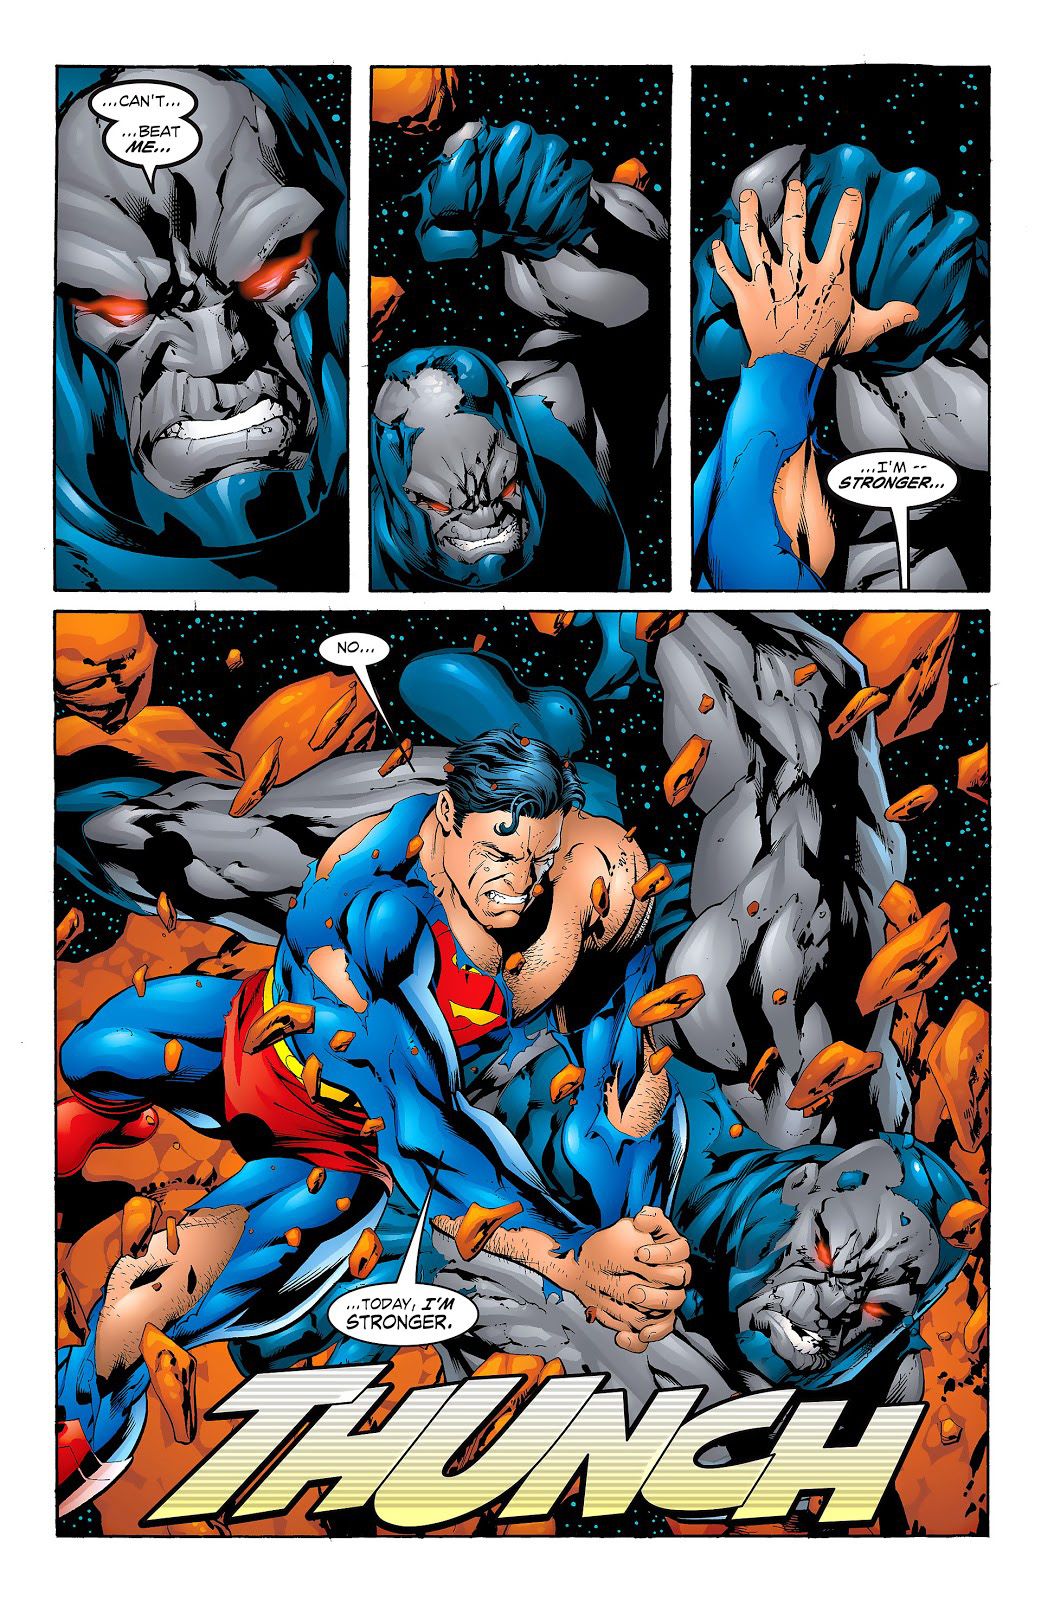 It takes all of Superman's might be neck and neck with the Darkseid